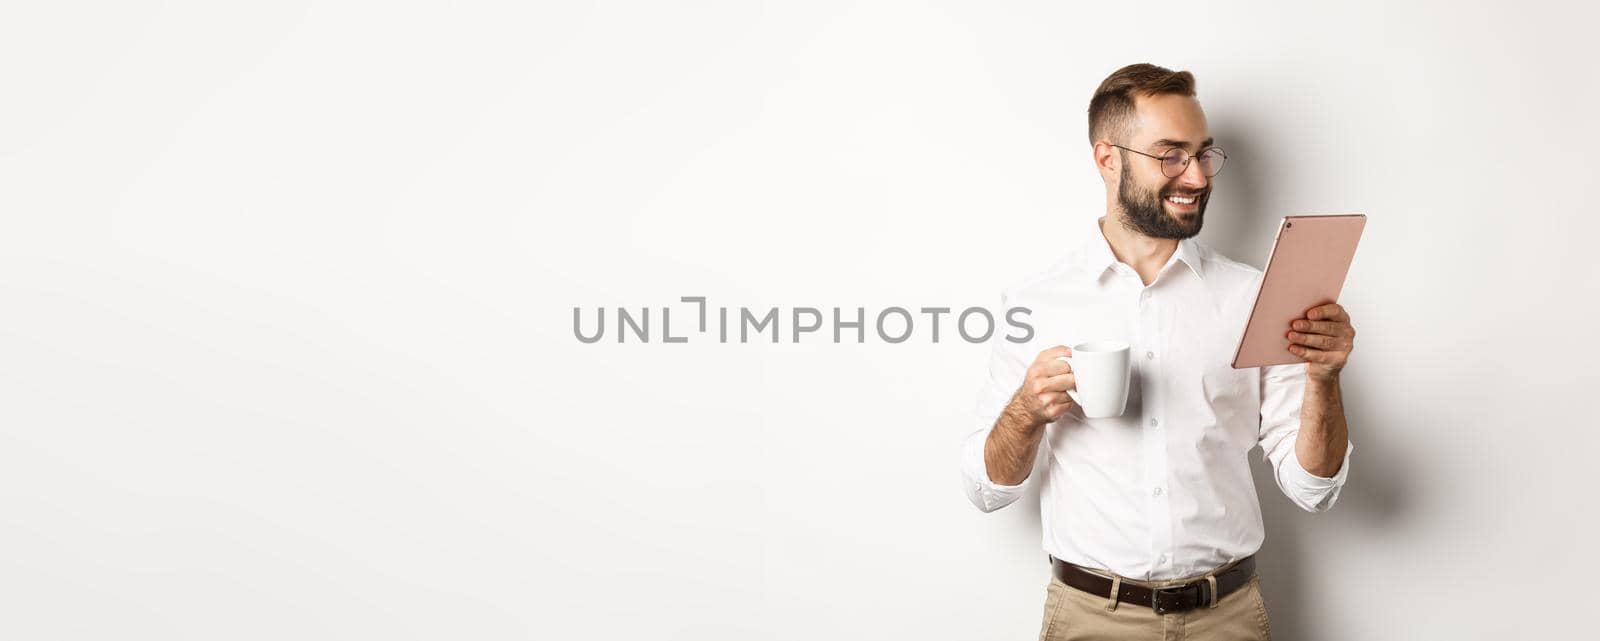 Handsome businessman drinking coffee and reading on digital tablet, smiling pleased, standing over white background.